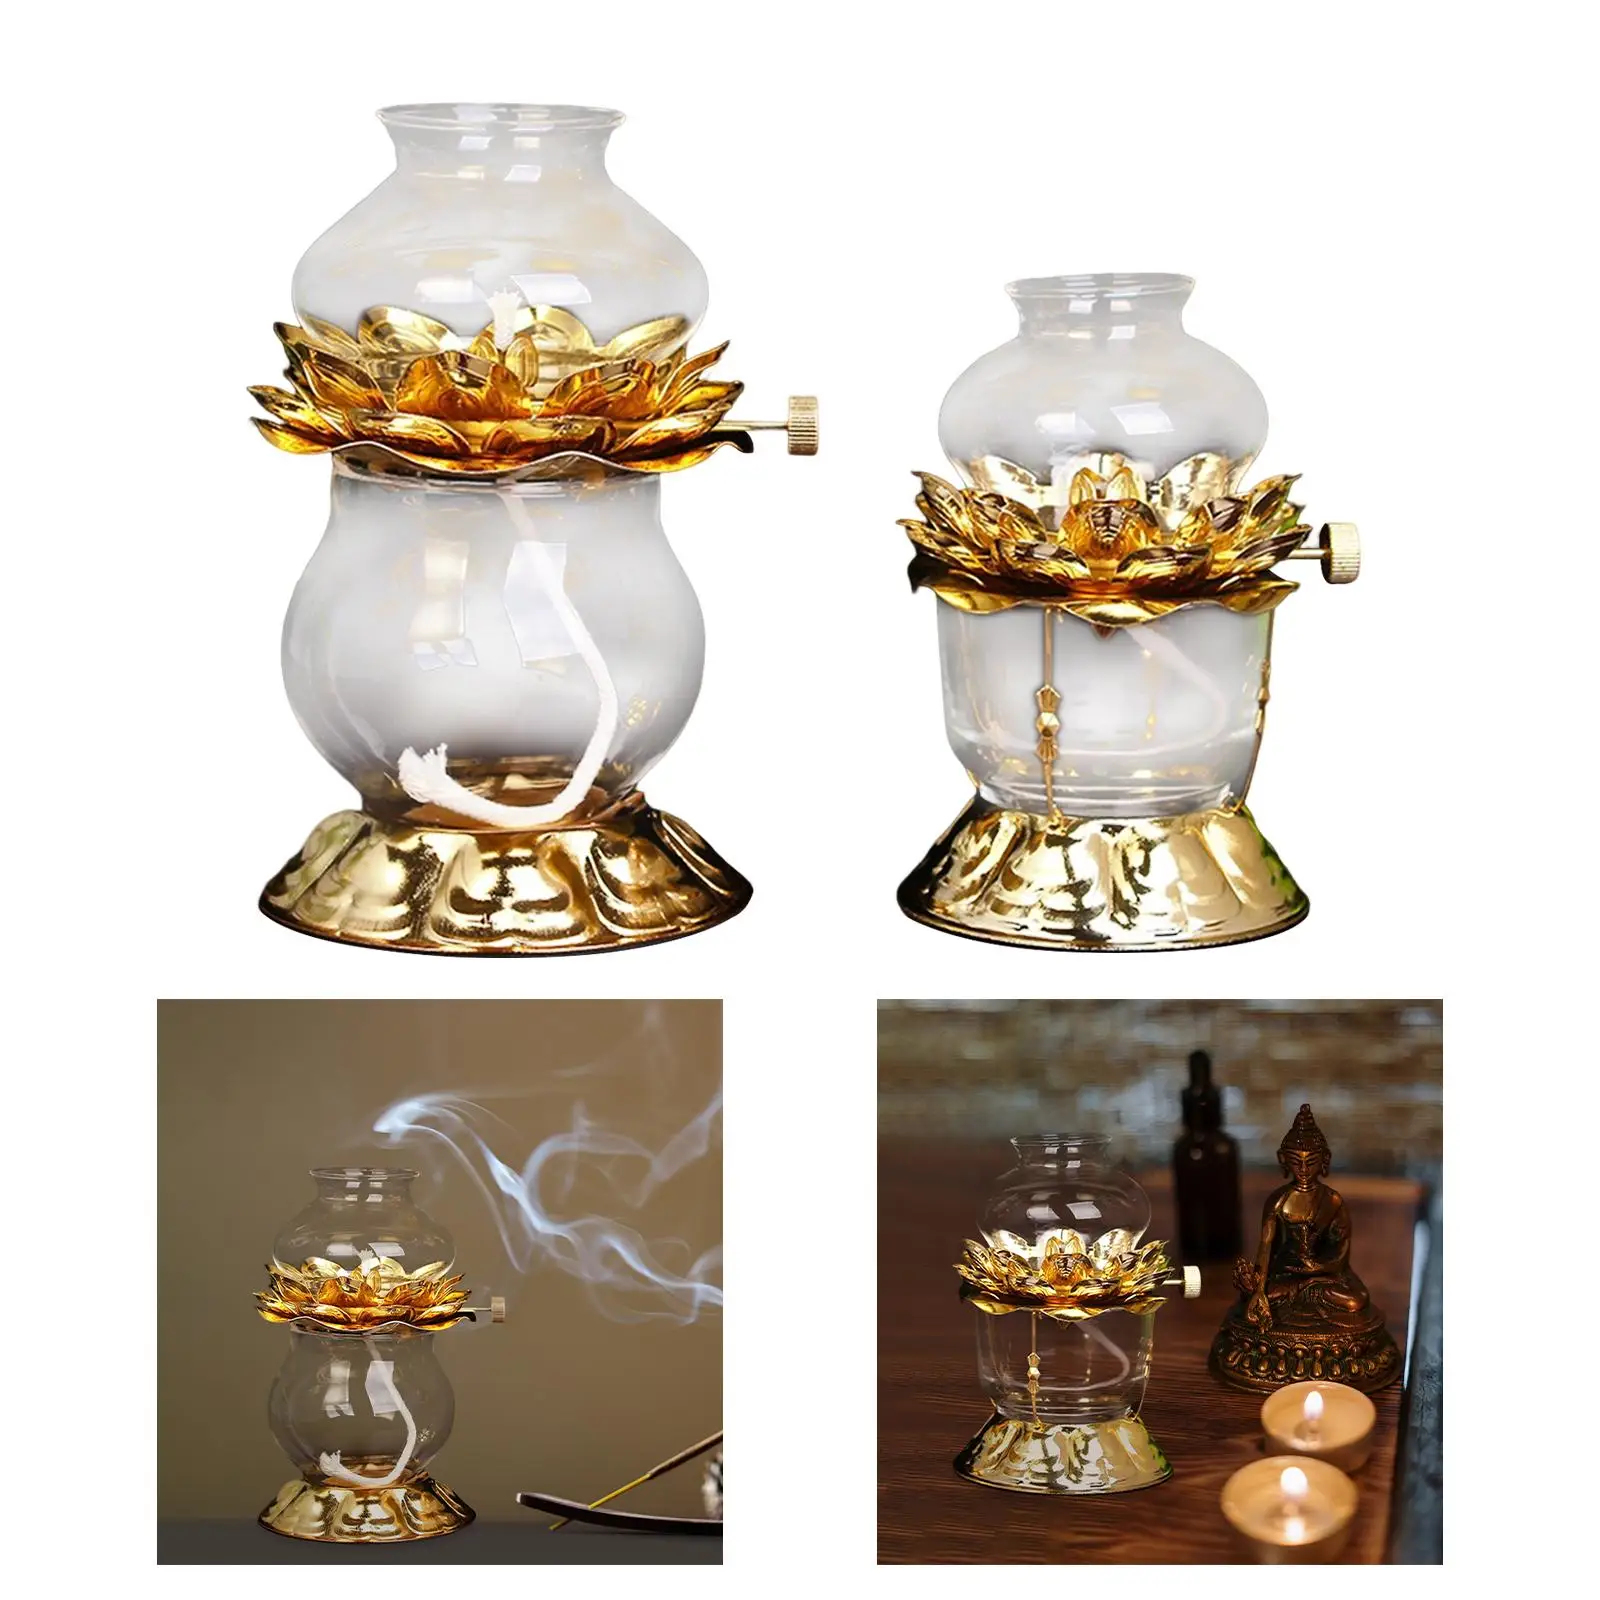 Vintage Style Oil Lamp Decorative Lotus Flower Lamp Oil Lantern Candle Light for Indoor Holiday Church Gifts